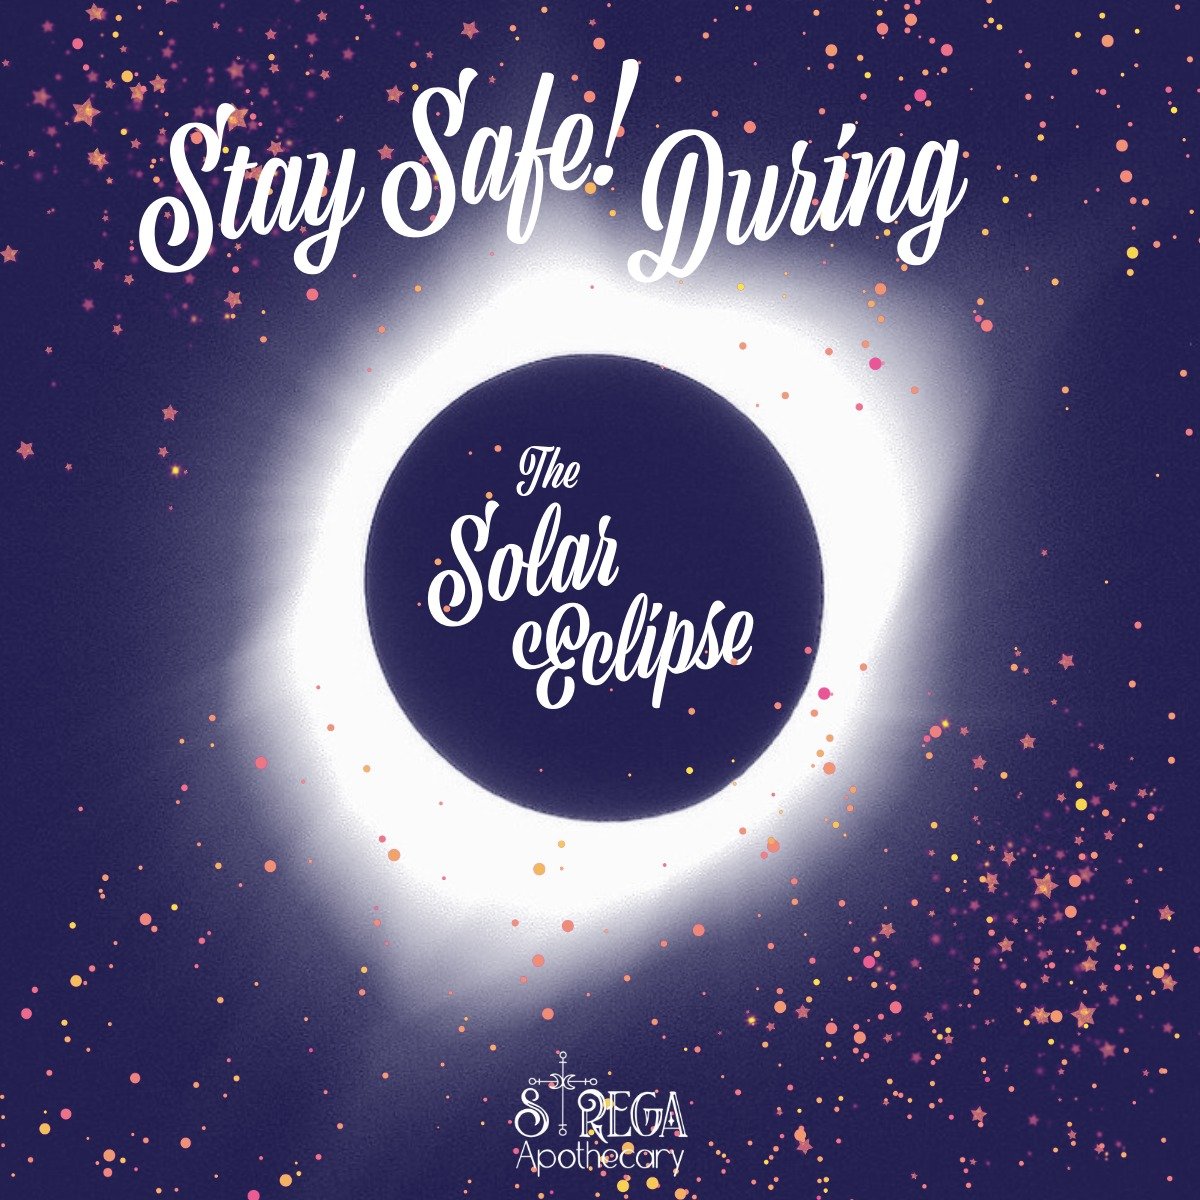 As the celestial ballet brings us another awe-inspiring moment, we at Strega want to send out a gentle reminder to keep safe during the upcoming solar eclipse!  Whether you're planning to witness the eclipse firsthand or simply soaking in its magic f